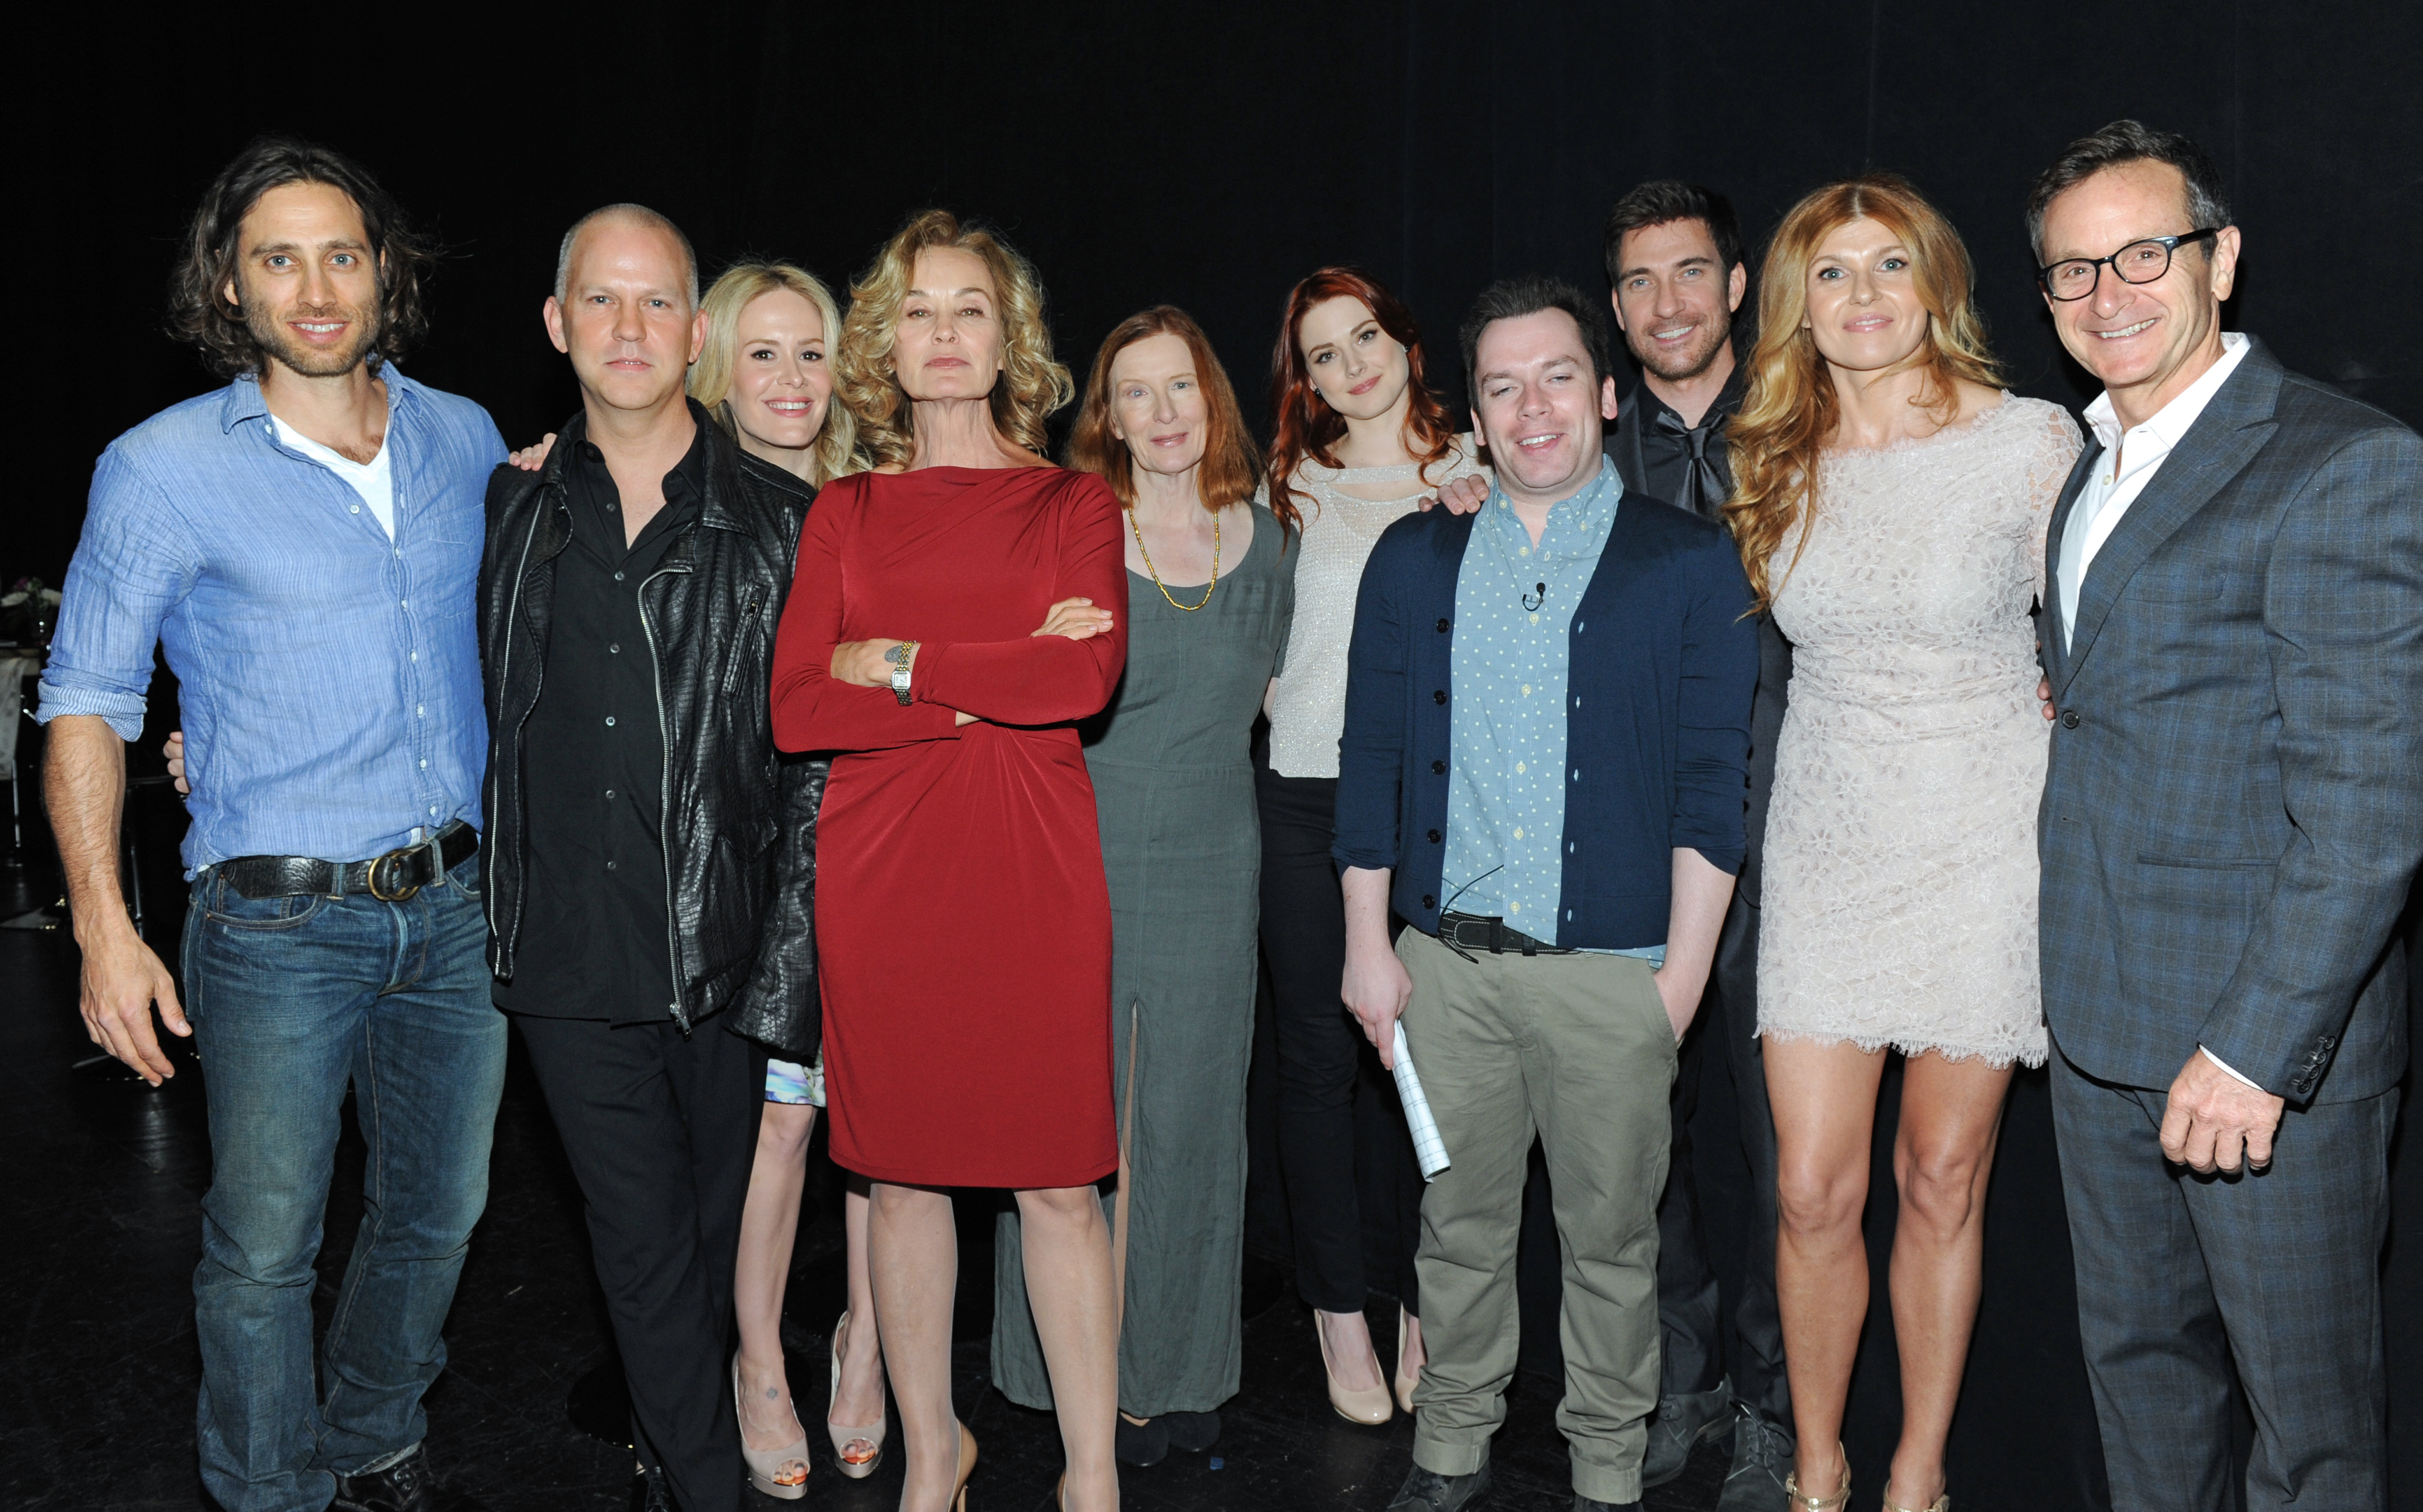 AMERICAN HORROR STORY at PaleyFest